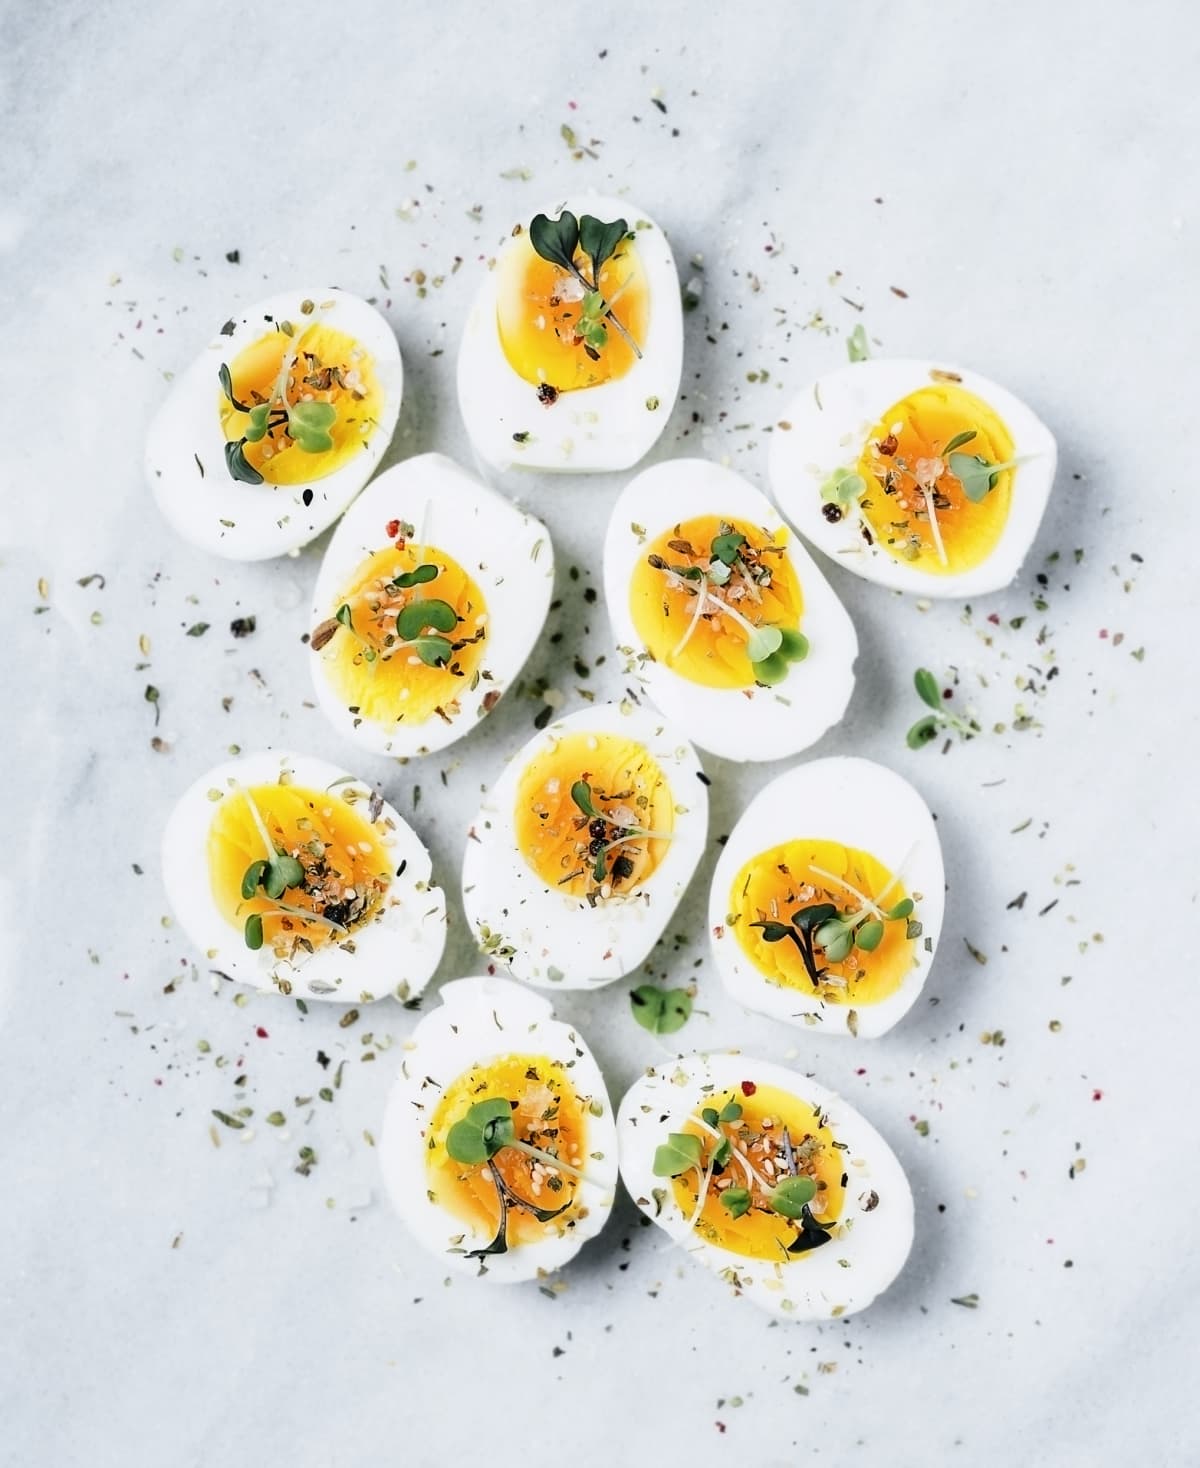 Several boiled eggs cut in half and topped with pepper and herbs